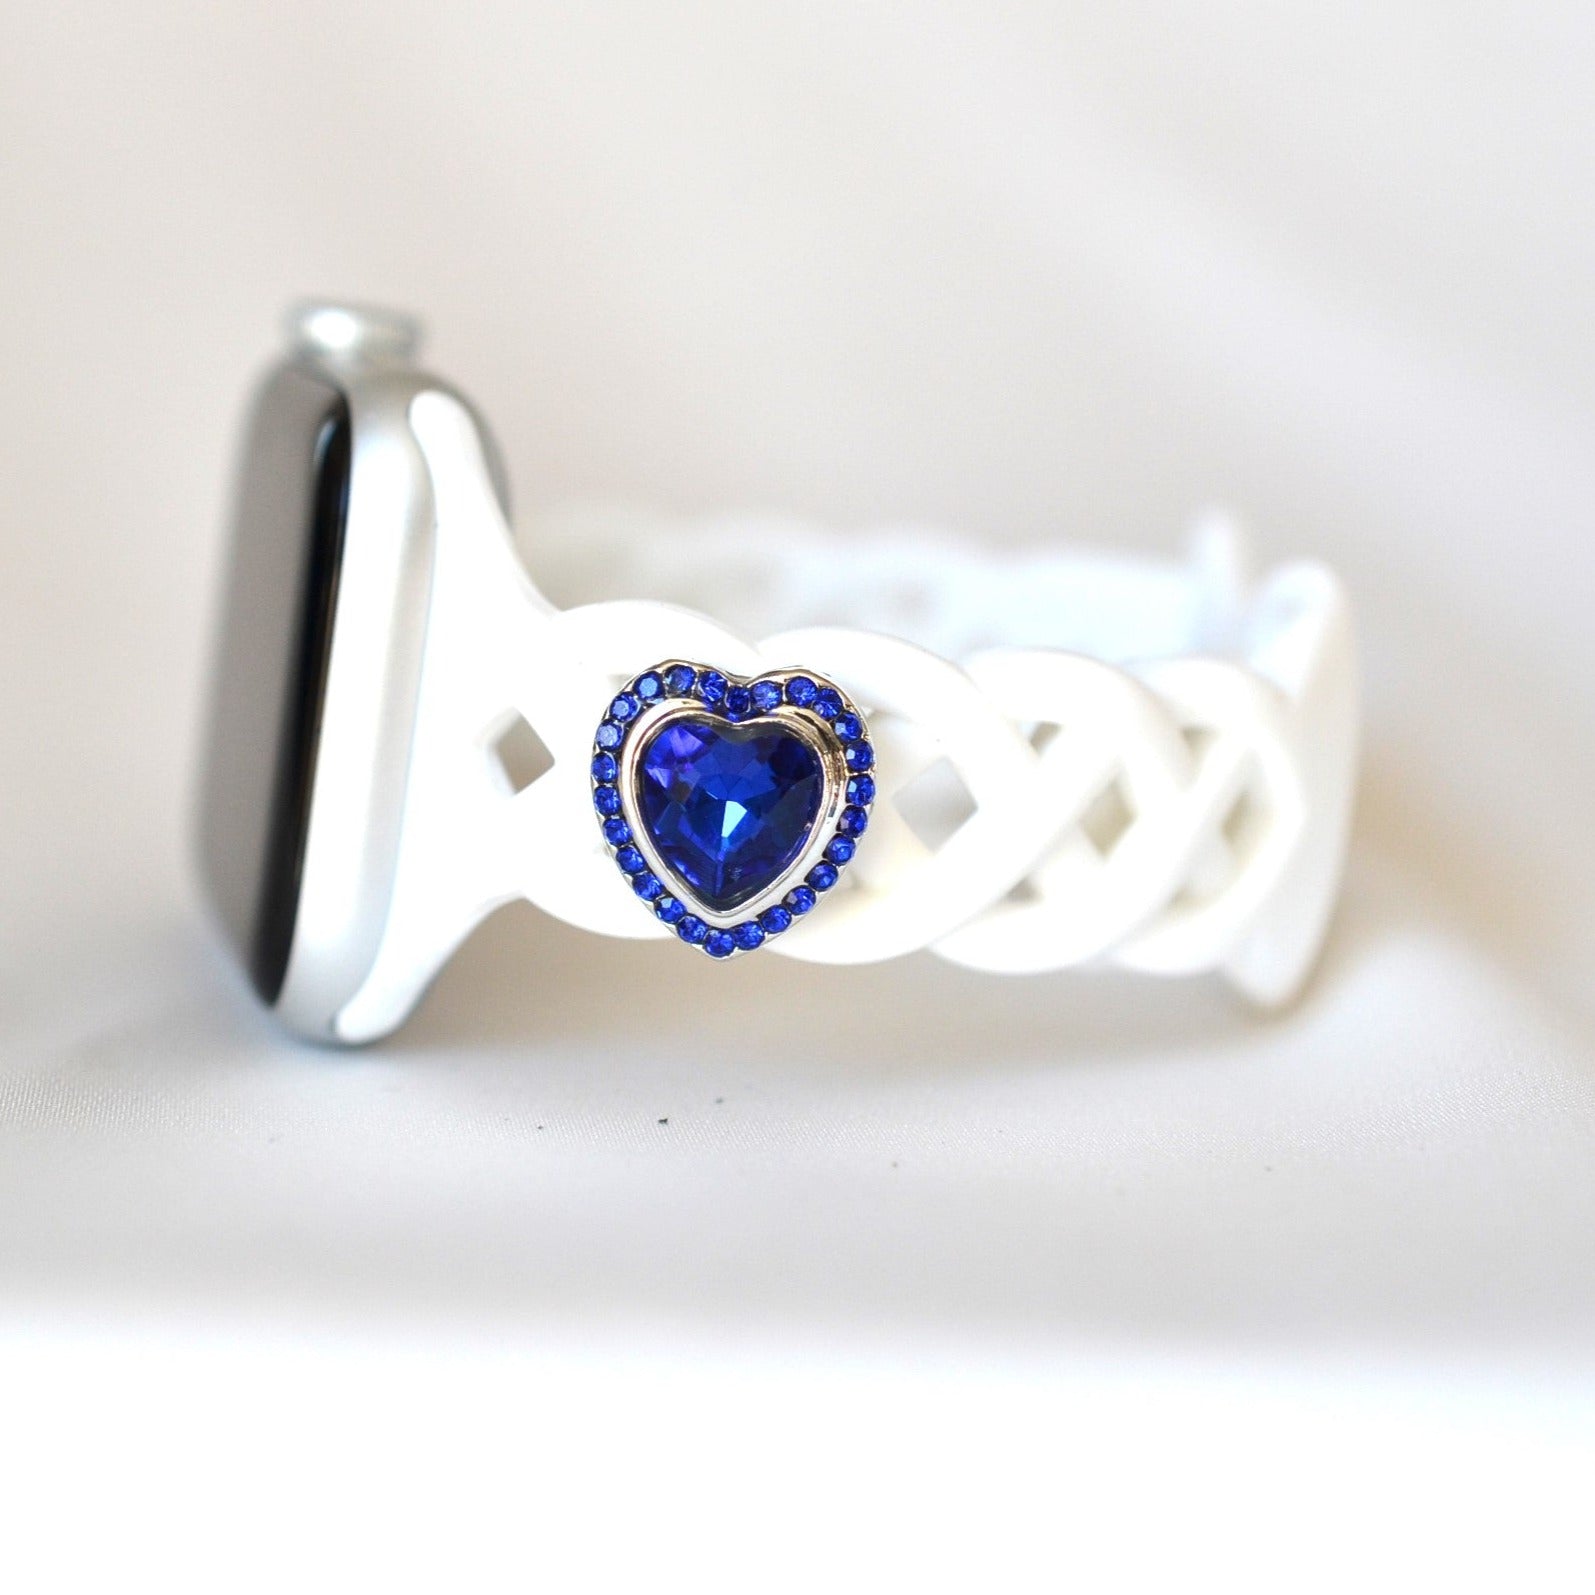 l Blue Heart Stone with Blue Rhinestone Charm for Belts, Bags and Watch Bands